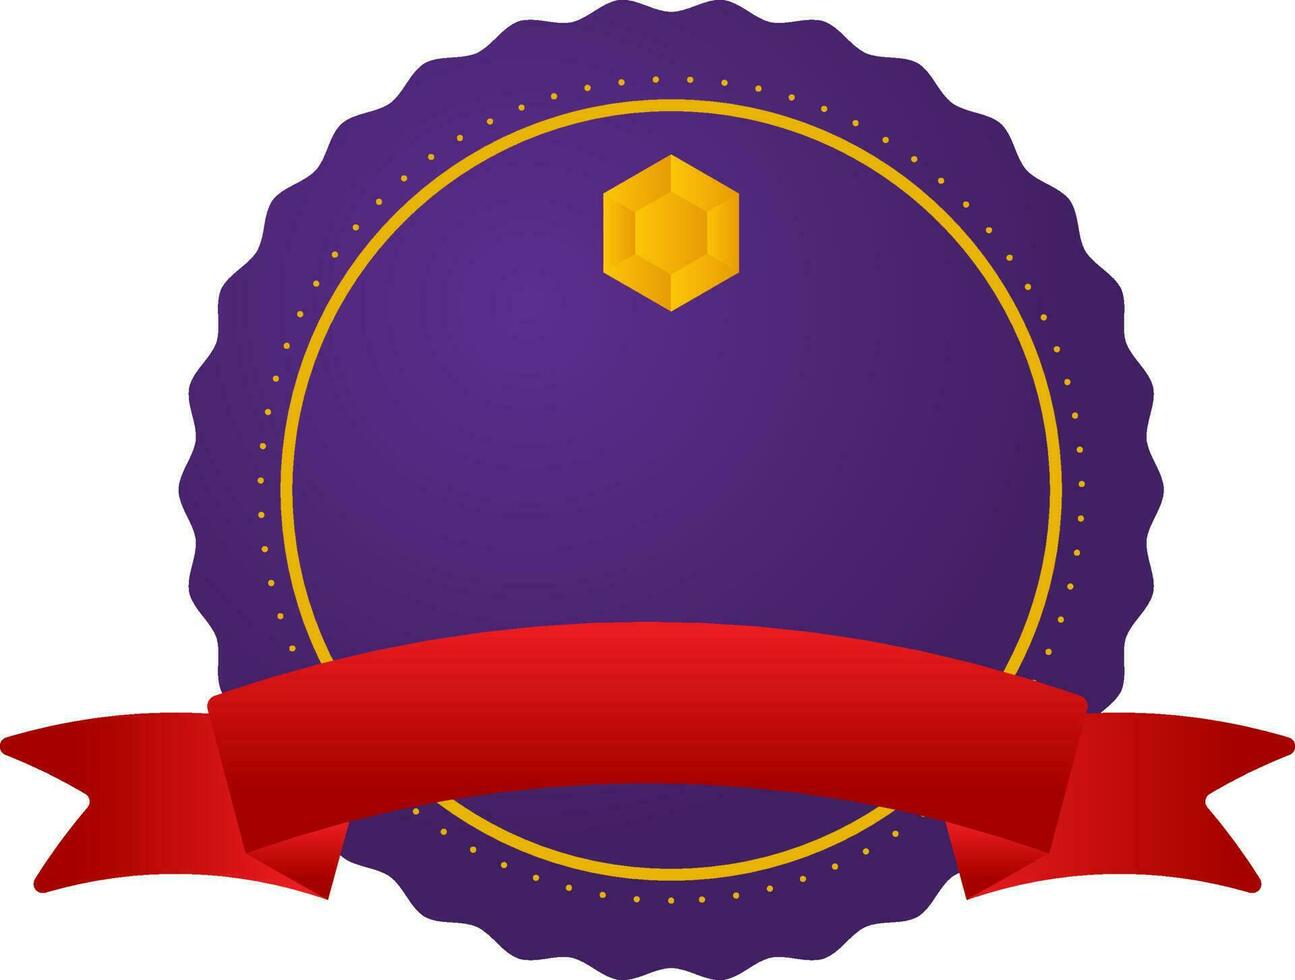 Empty Round Badge Or Label With Ribbon In Purple And Red Color. vector